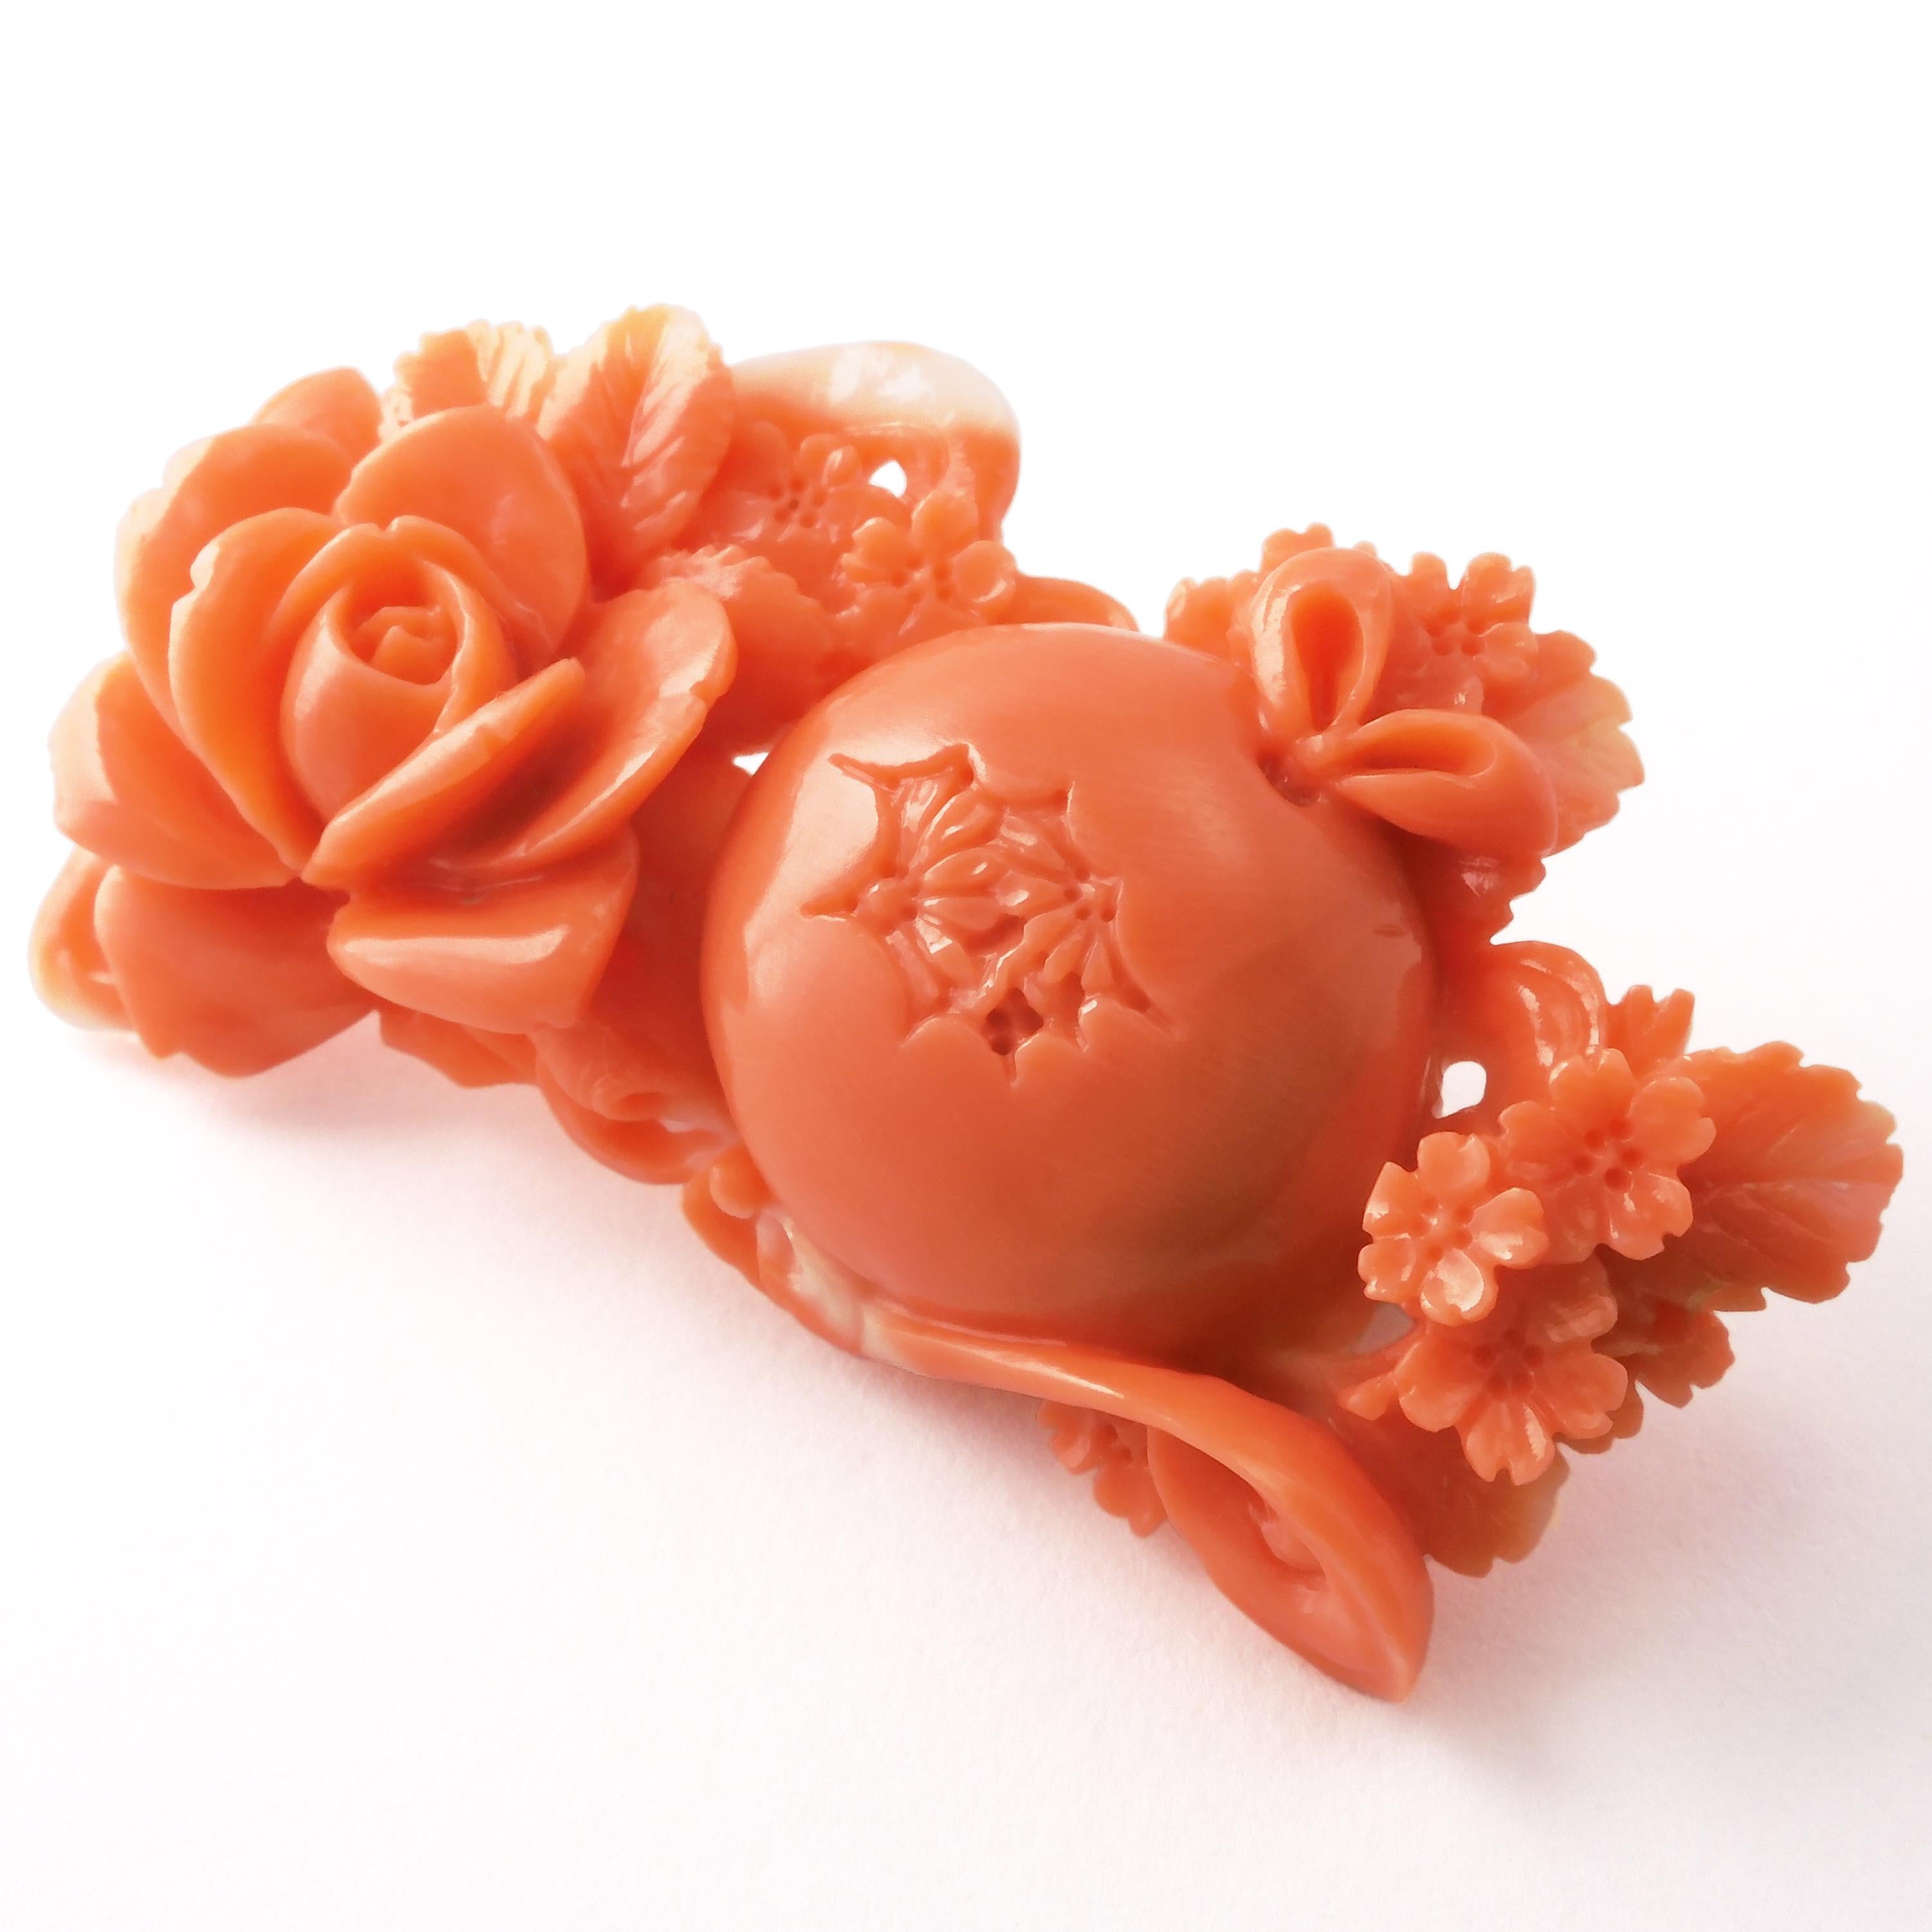 This vintage Japanese Momoiro Sango Coral plate is delicately carved into Rose and Primrose Flowers. The carving is three dimensional and decorated with detailed flowers.  The height of craftsmanship is evident in this fine carving.

About the